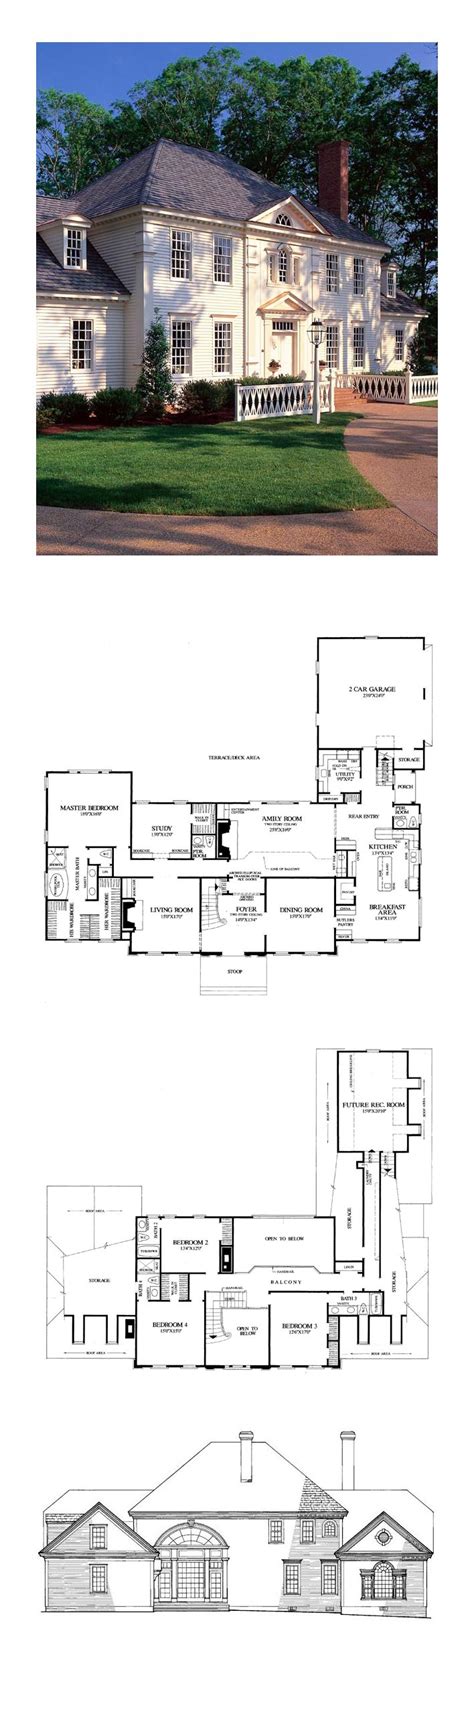 southern style house plan    bed  bath  car garage house plans mansion southern